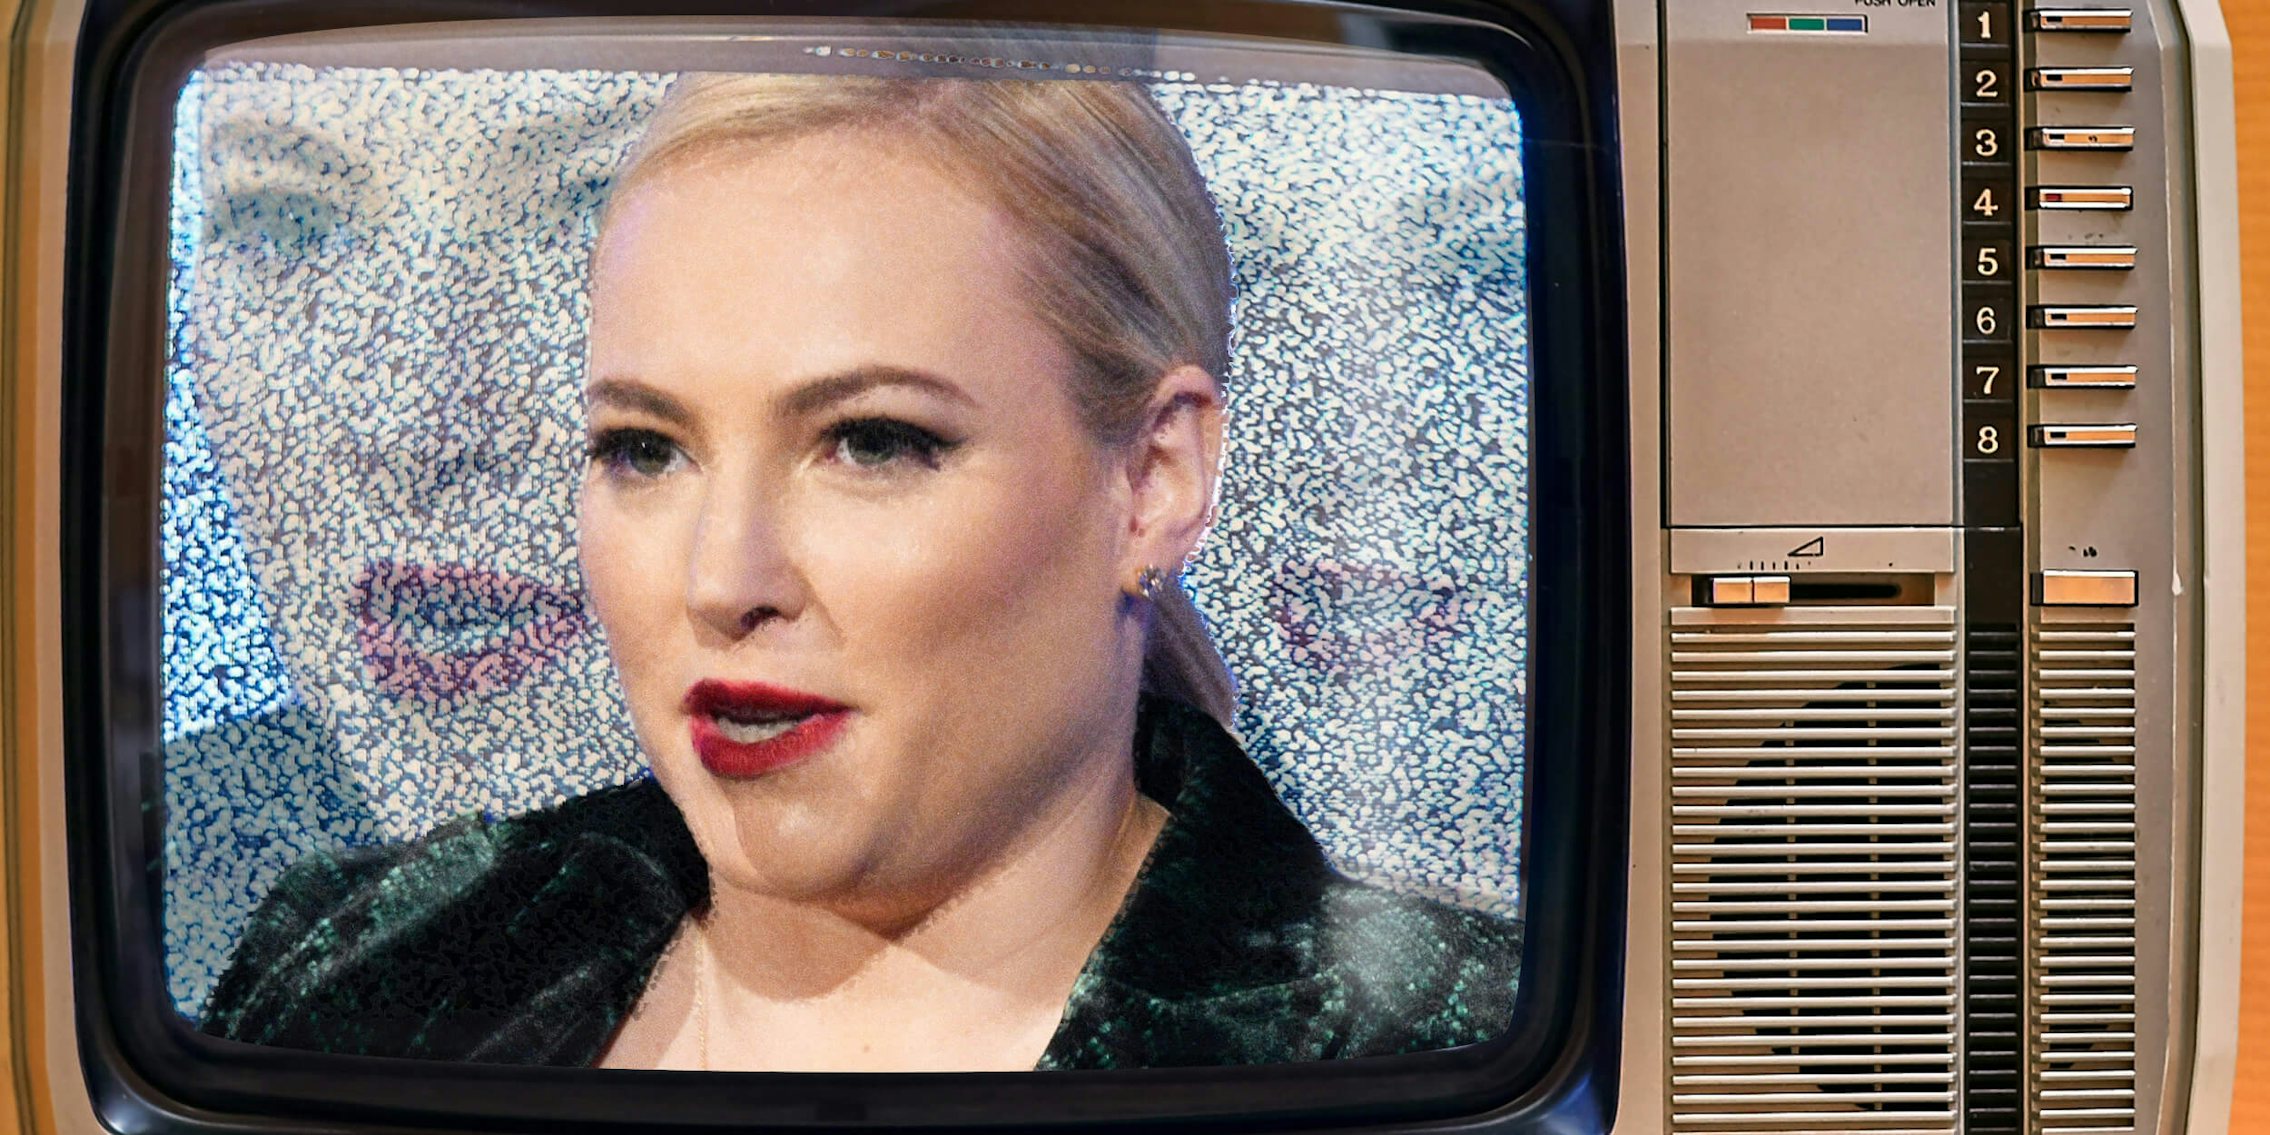 Meghan McCain on an old television set